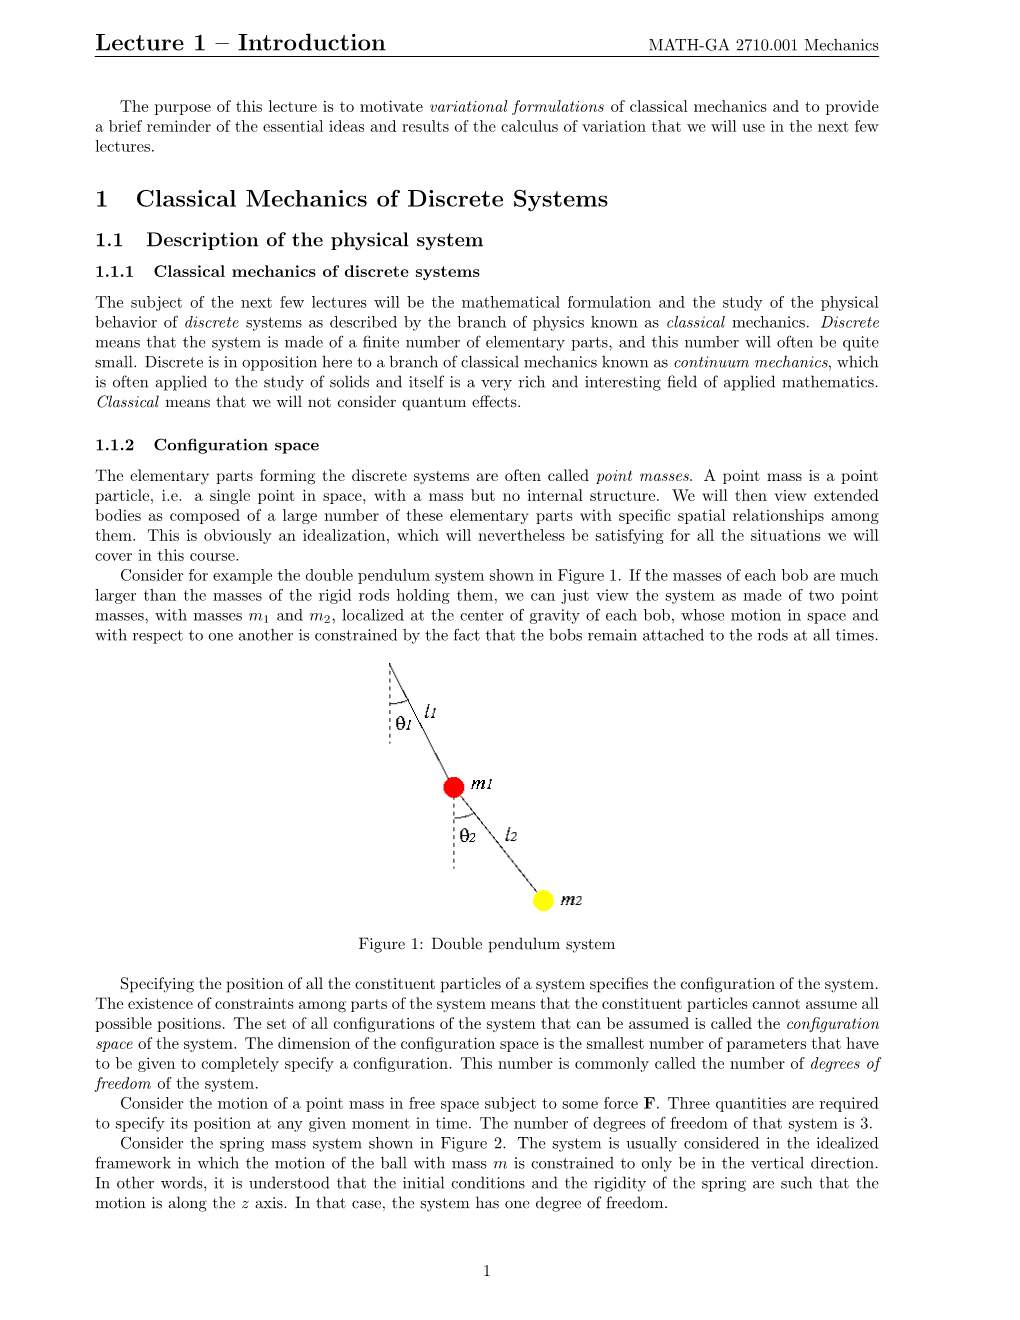 Lecture 1 – Introduction 1 Classical Mechanics of Discrete Systems